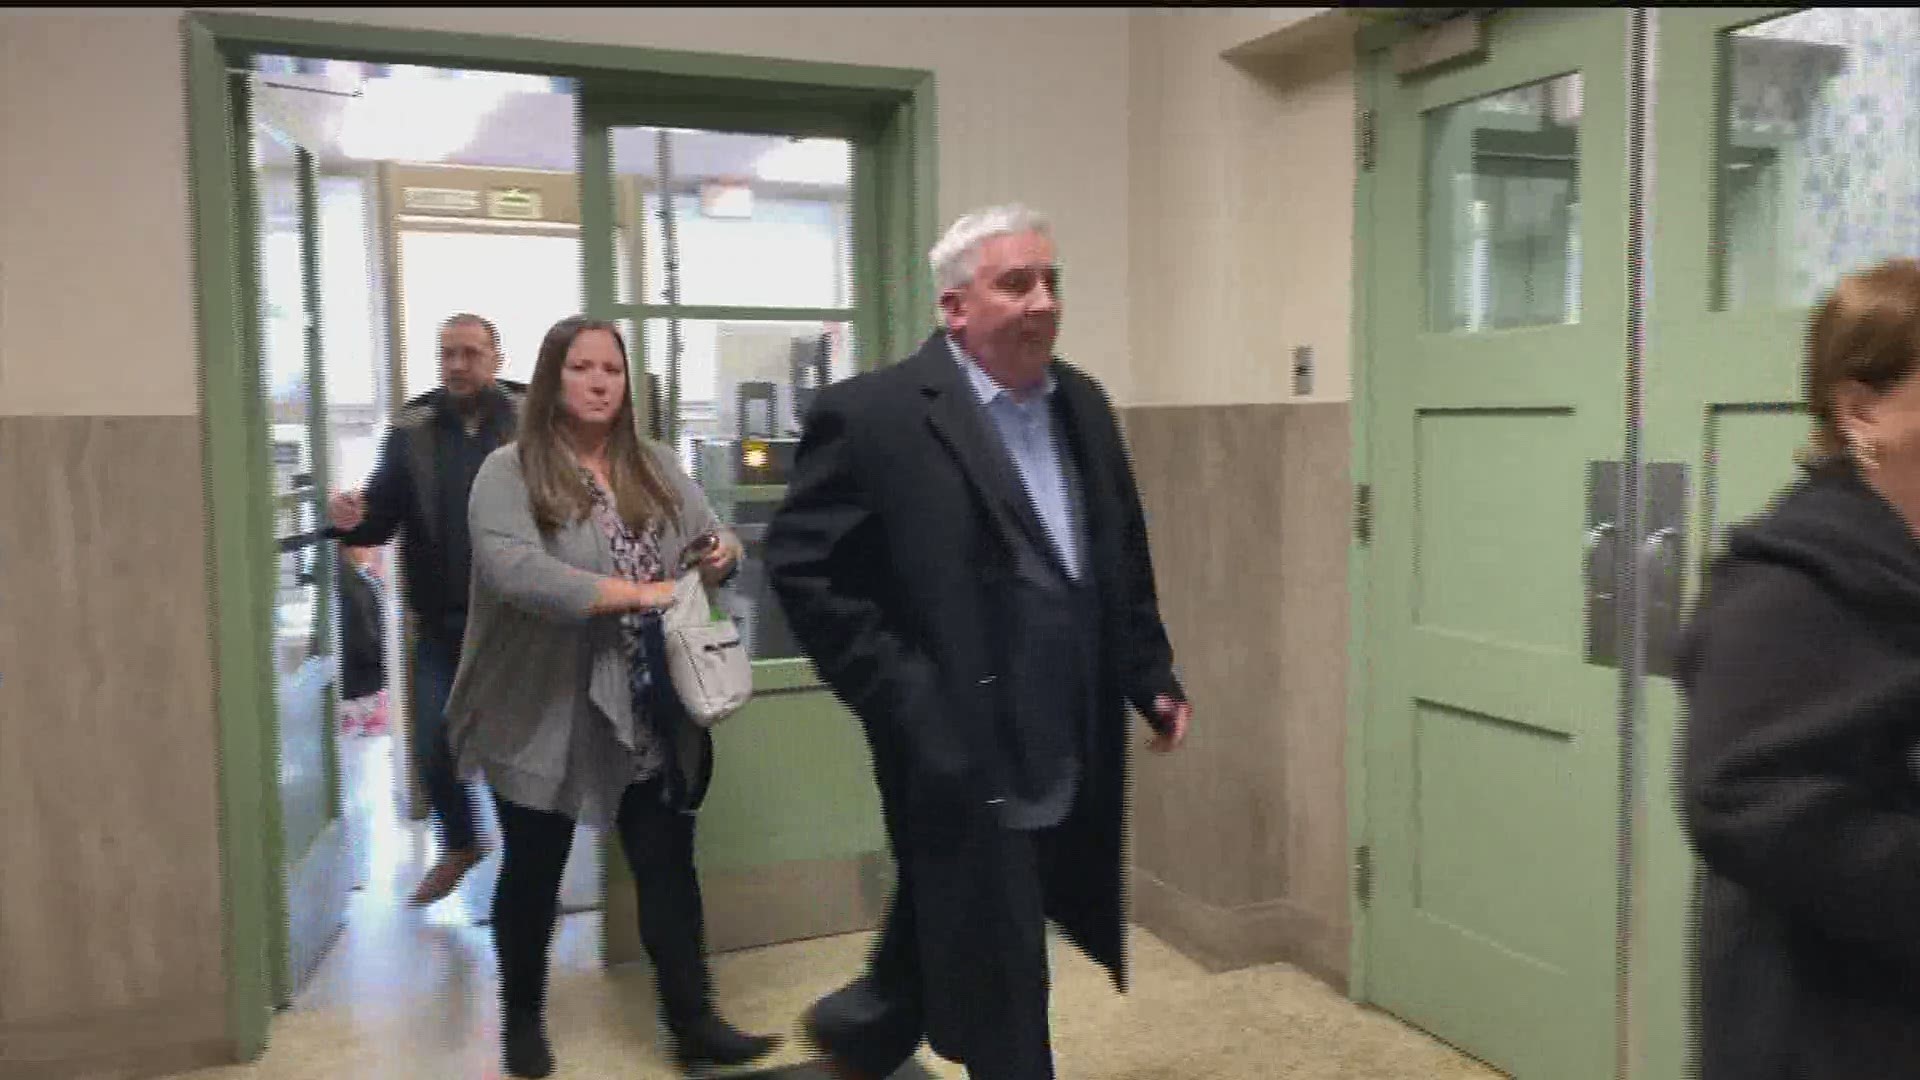 The former state Senator is expected to be sentenced in three months